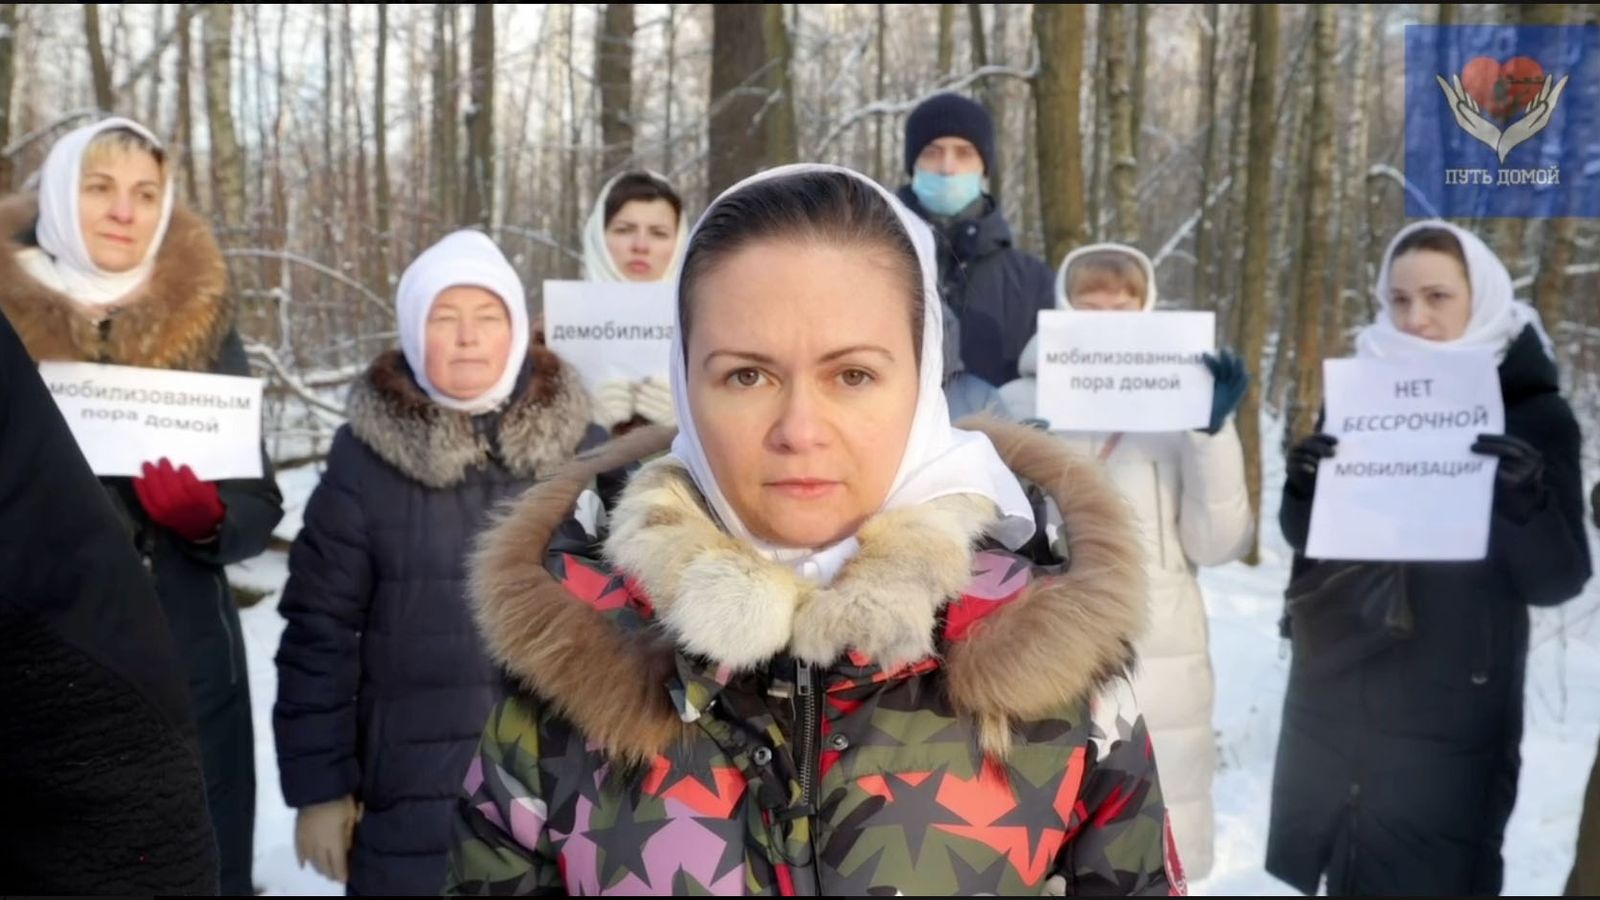 Ukraine war: Wives of men mobilised to Russian frontline call for end to 'legal slavery'